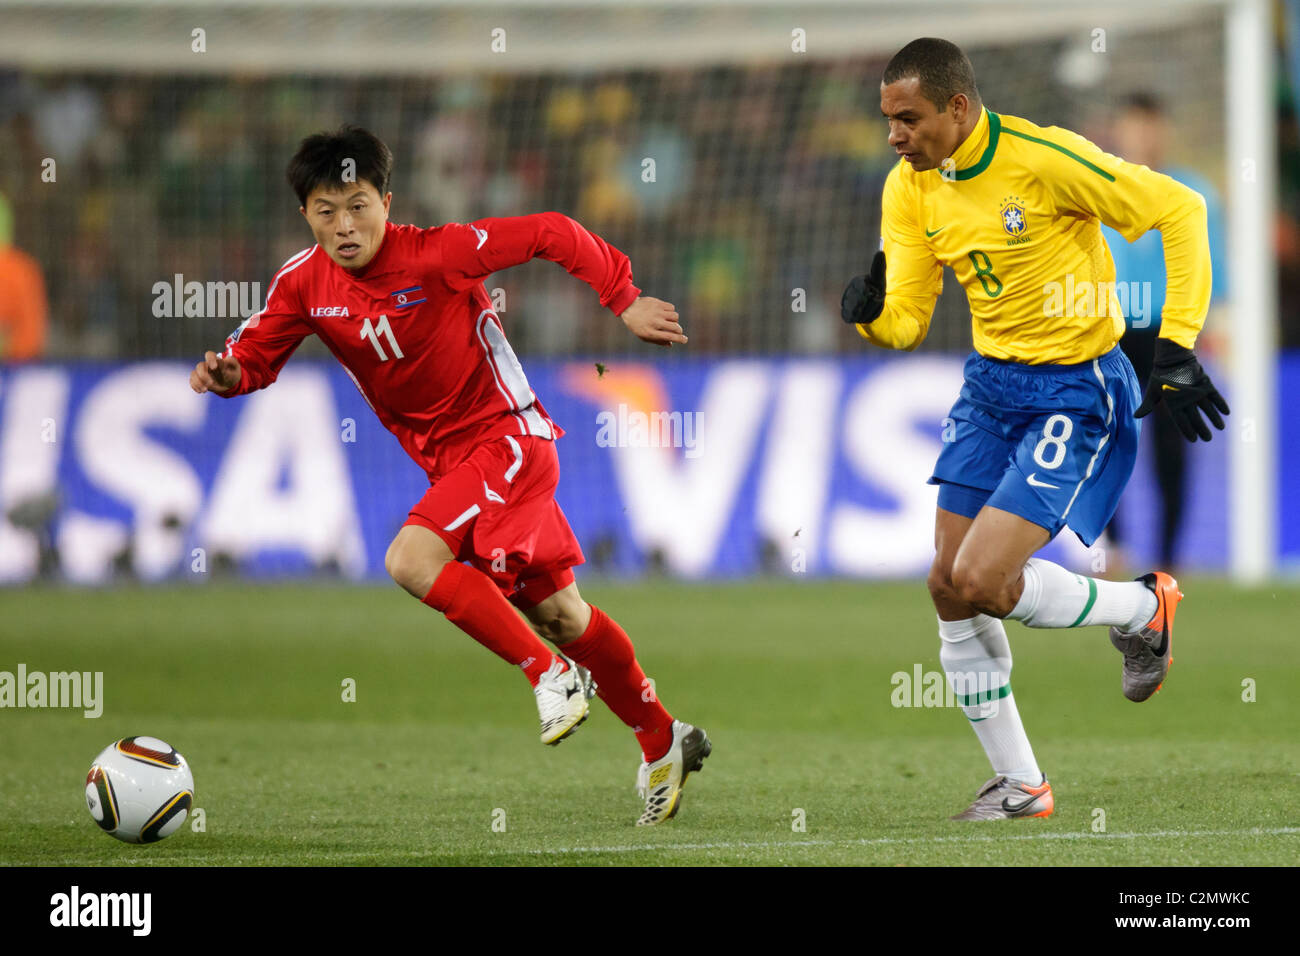 In Guk Mun of North Korea (11) controls the ball against Gilberto Silva of Brazil (8) during a 2010 FIFA World Cup Group G match Stock Photo